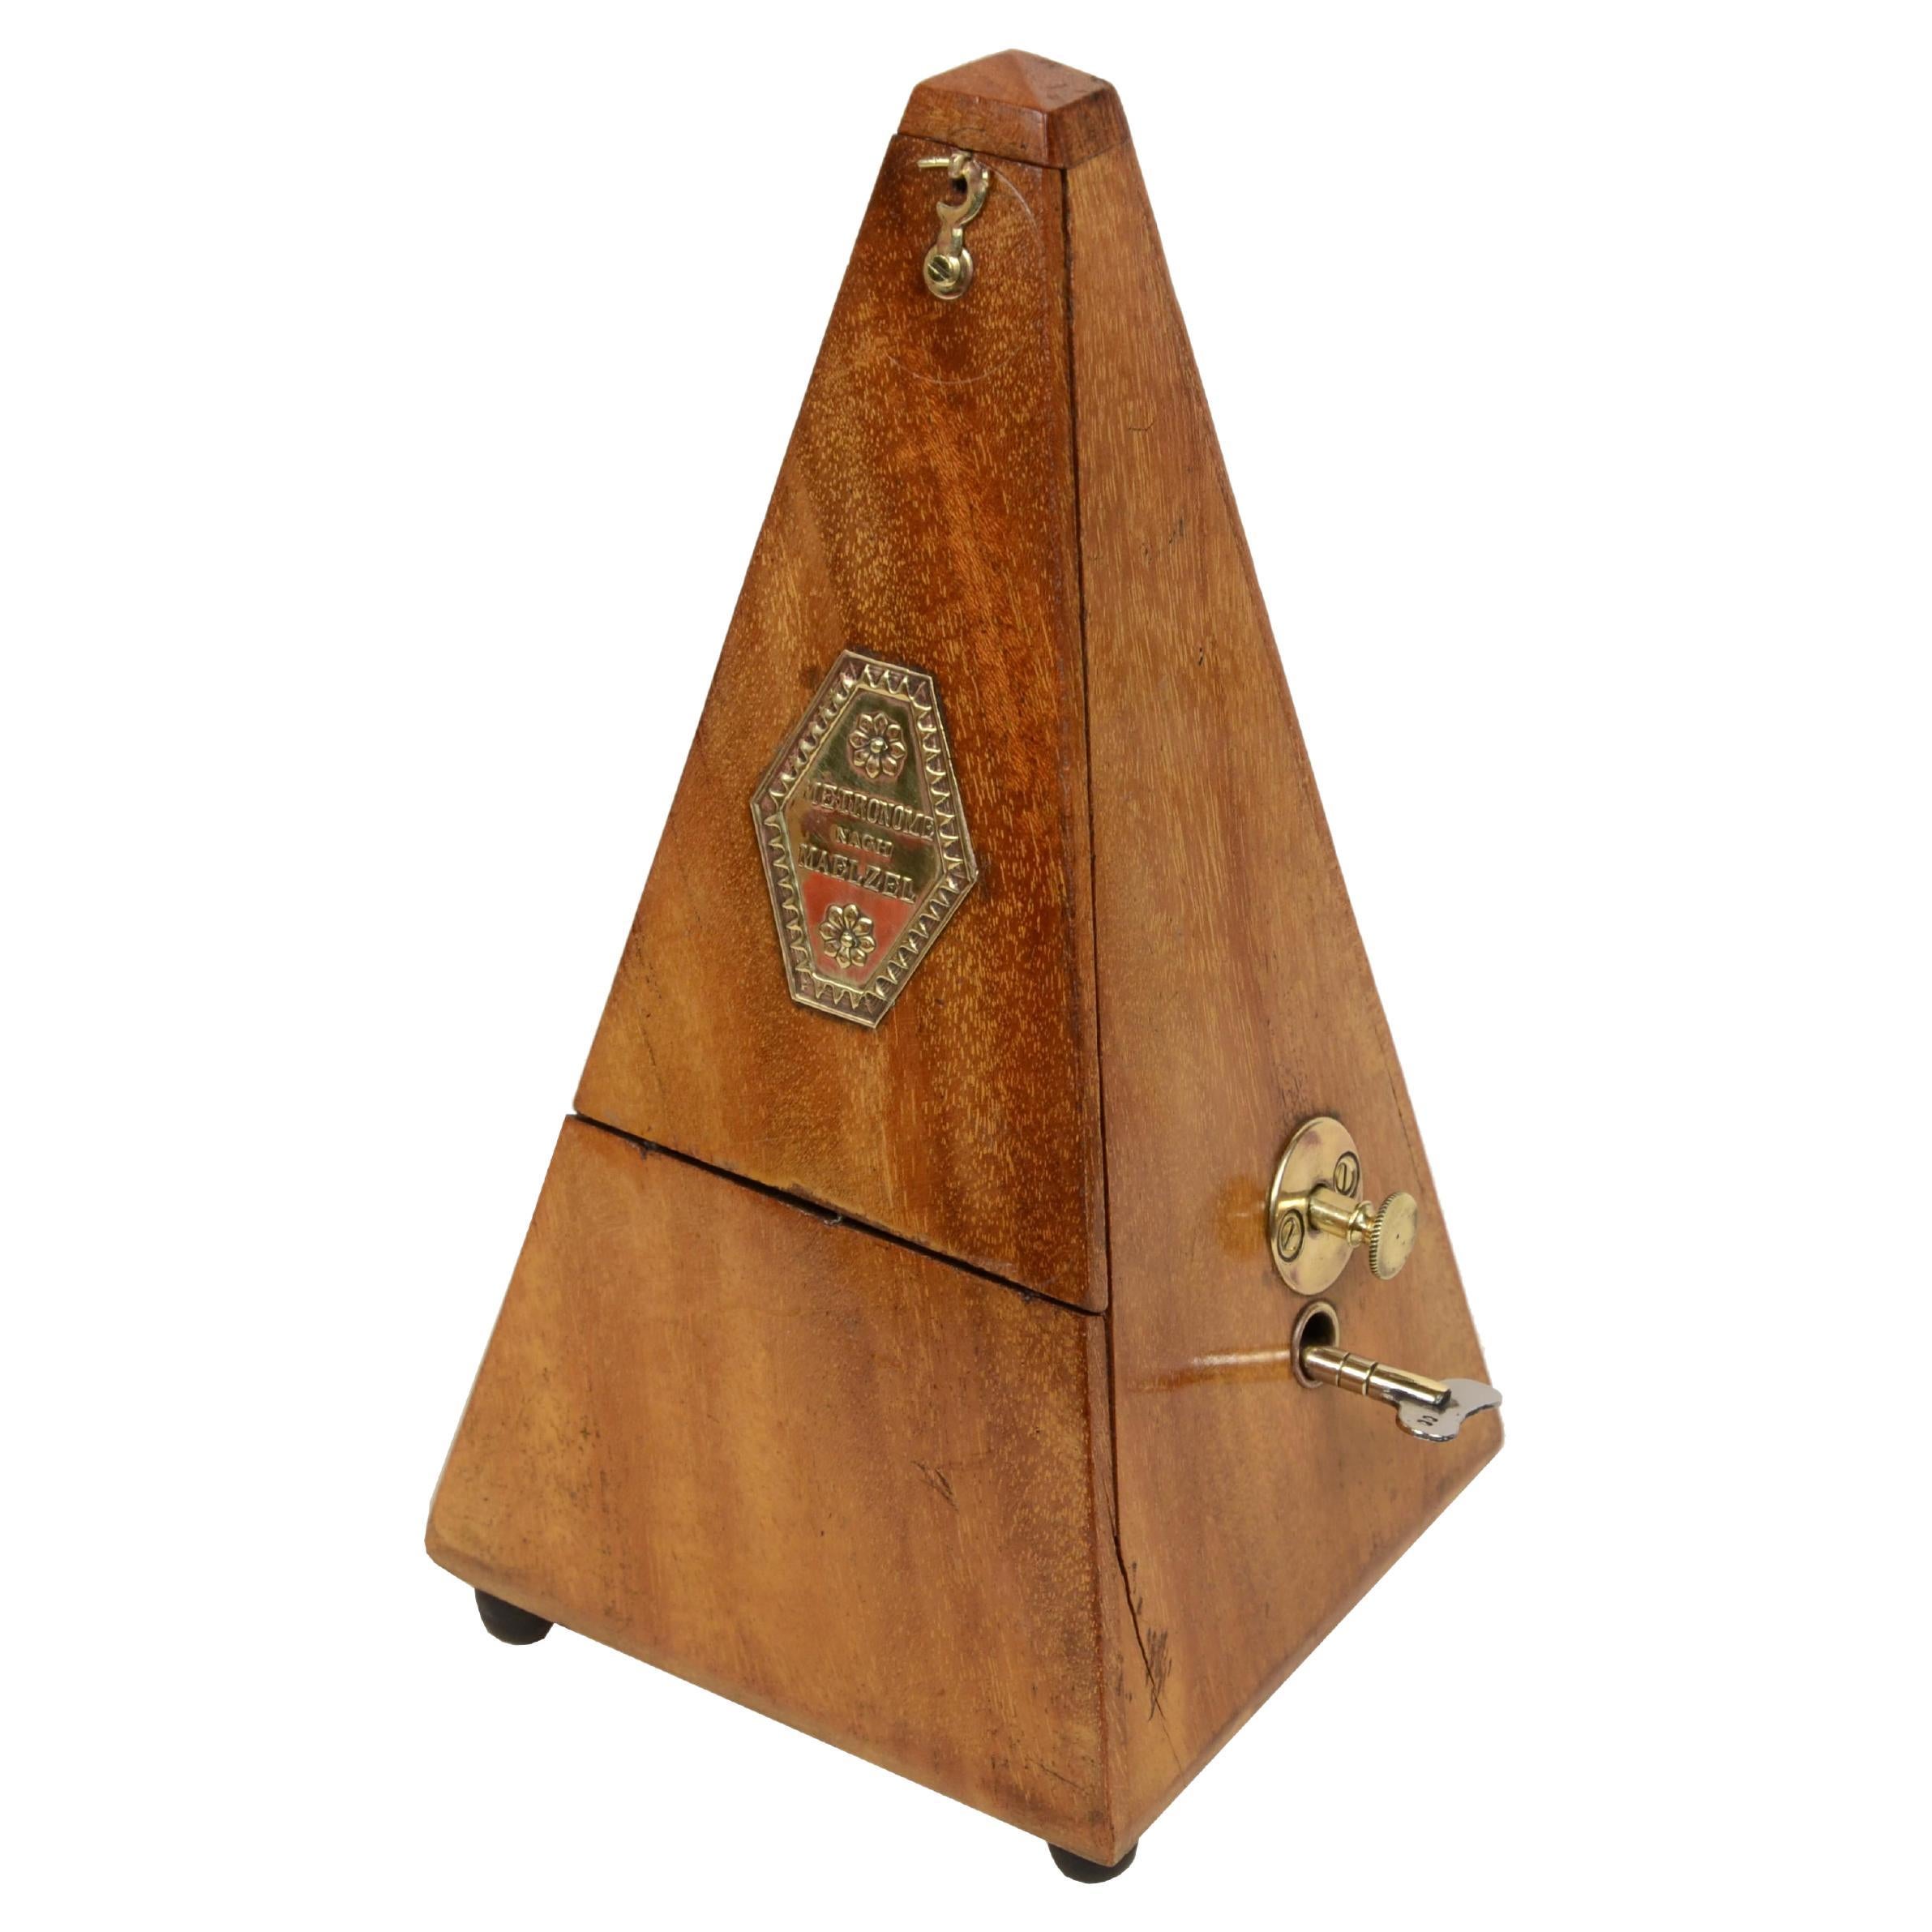 Metronome system  Johan Maelzel (1772-1838) in wood from the early 1900s. For Sale